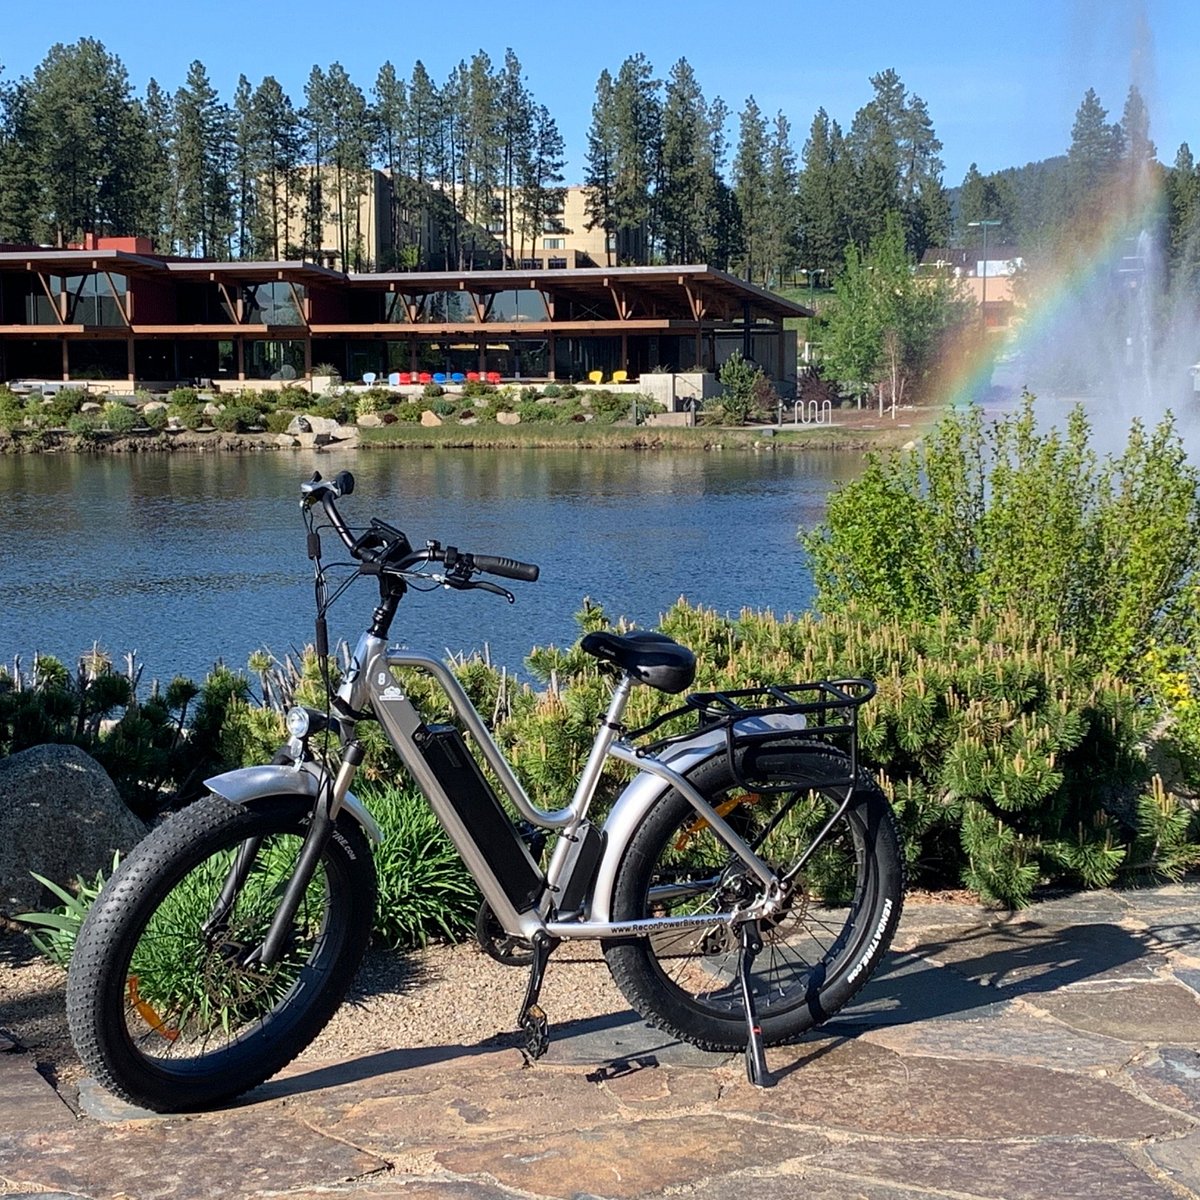 ELECTRIC ADVENTURES (Coeur d'Alene) What Should I Know BEFORE I Go?